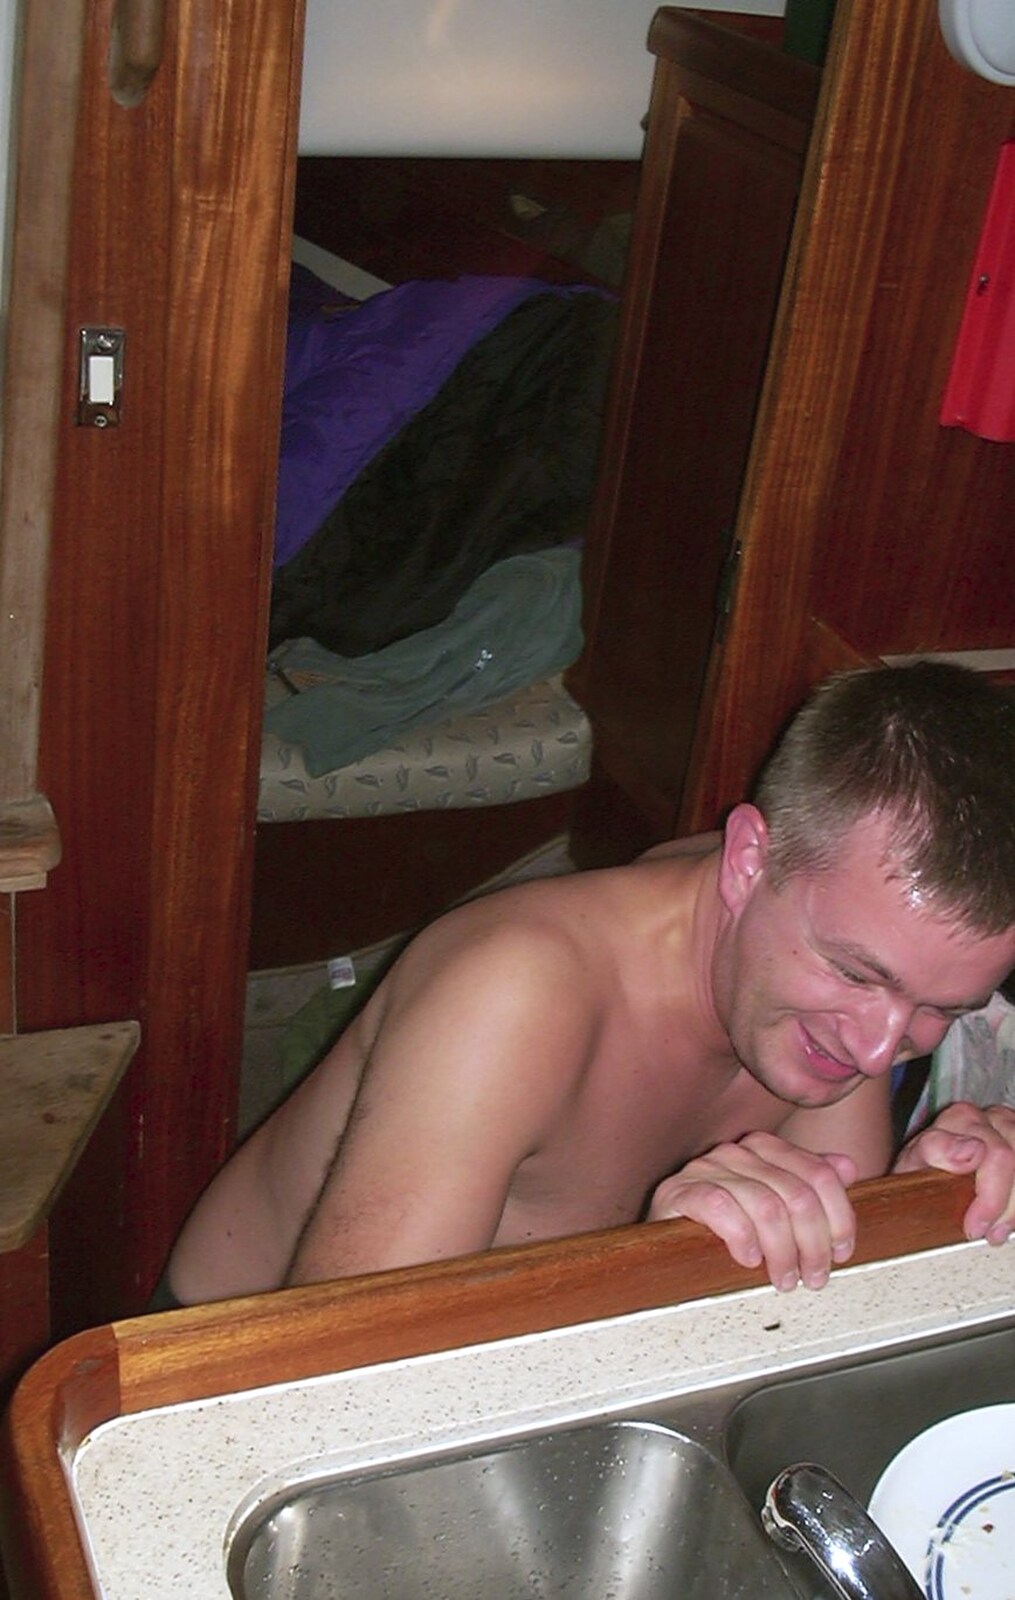 A 3G Lab Sailing Trip, Shotley, Suffolk - 6th September 2001: Nosher bails out and sleeps on the floor